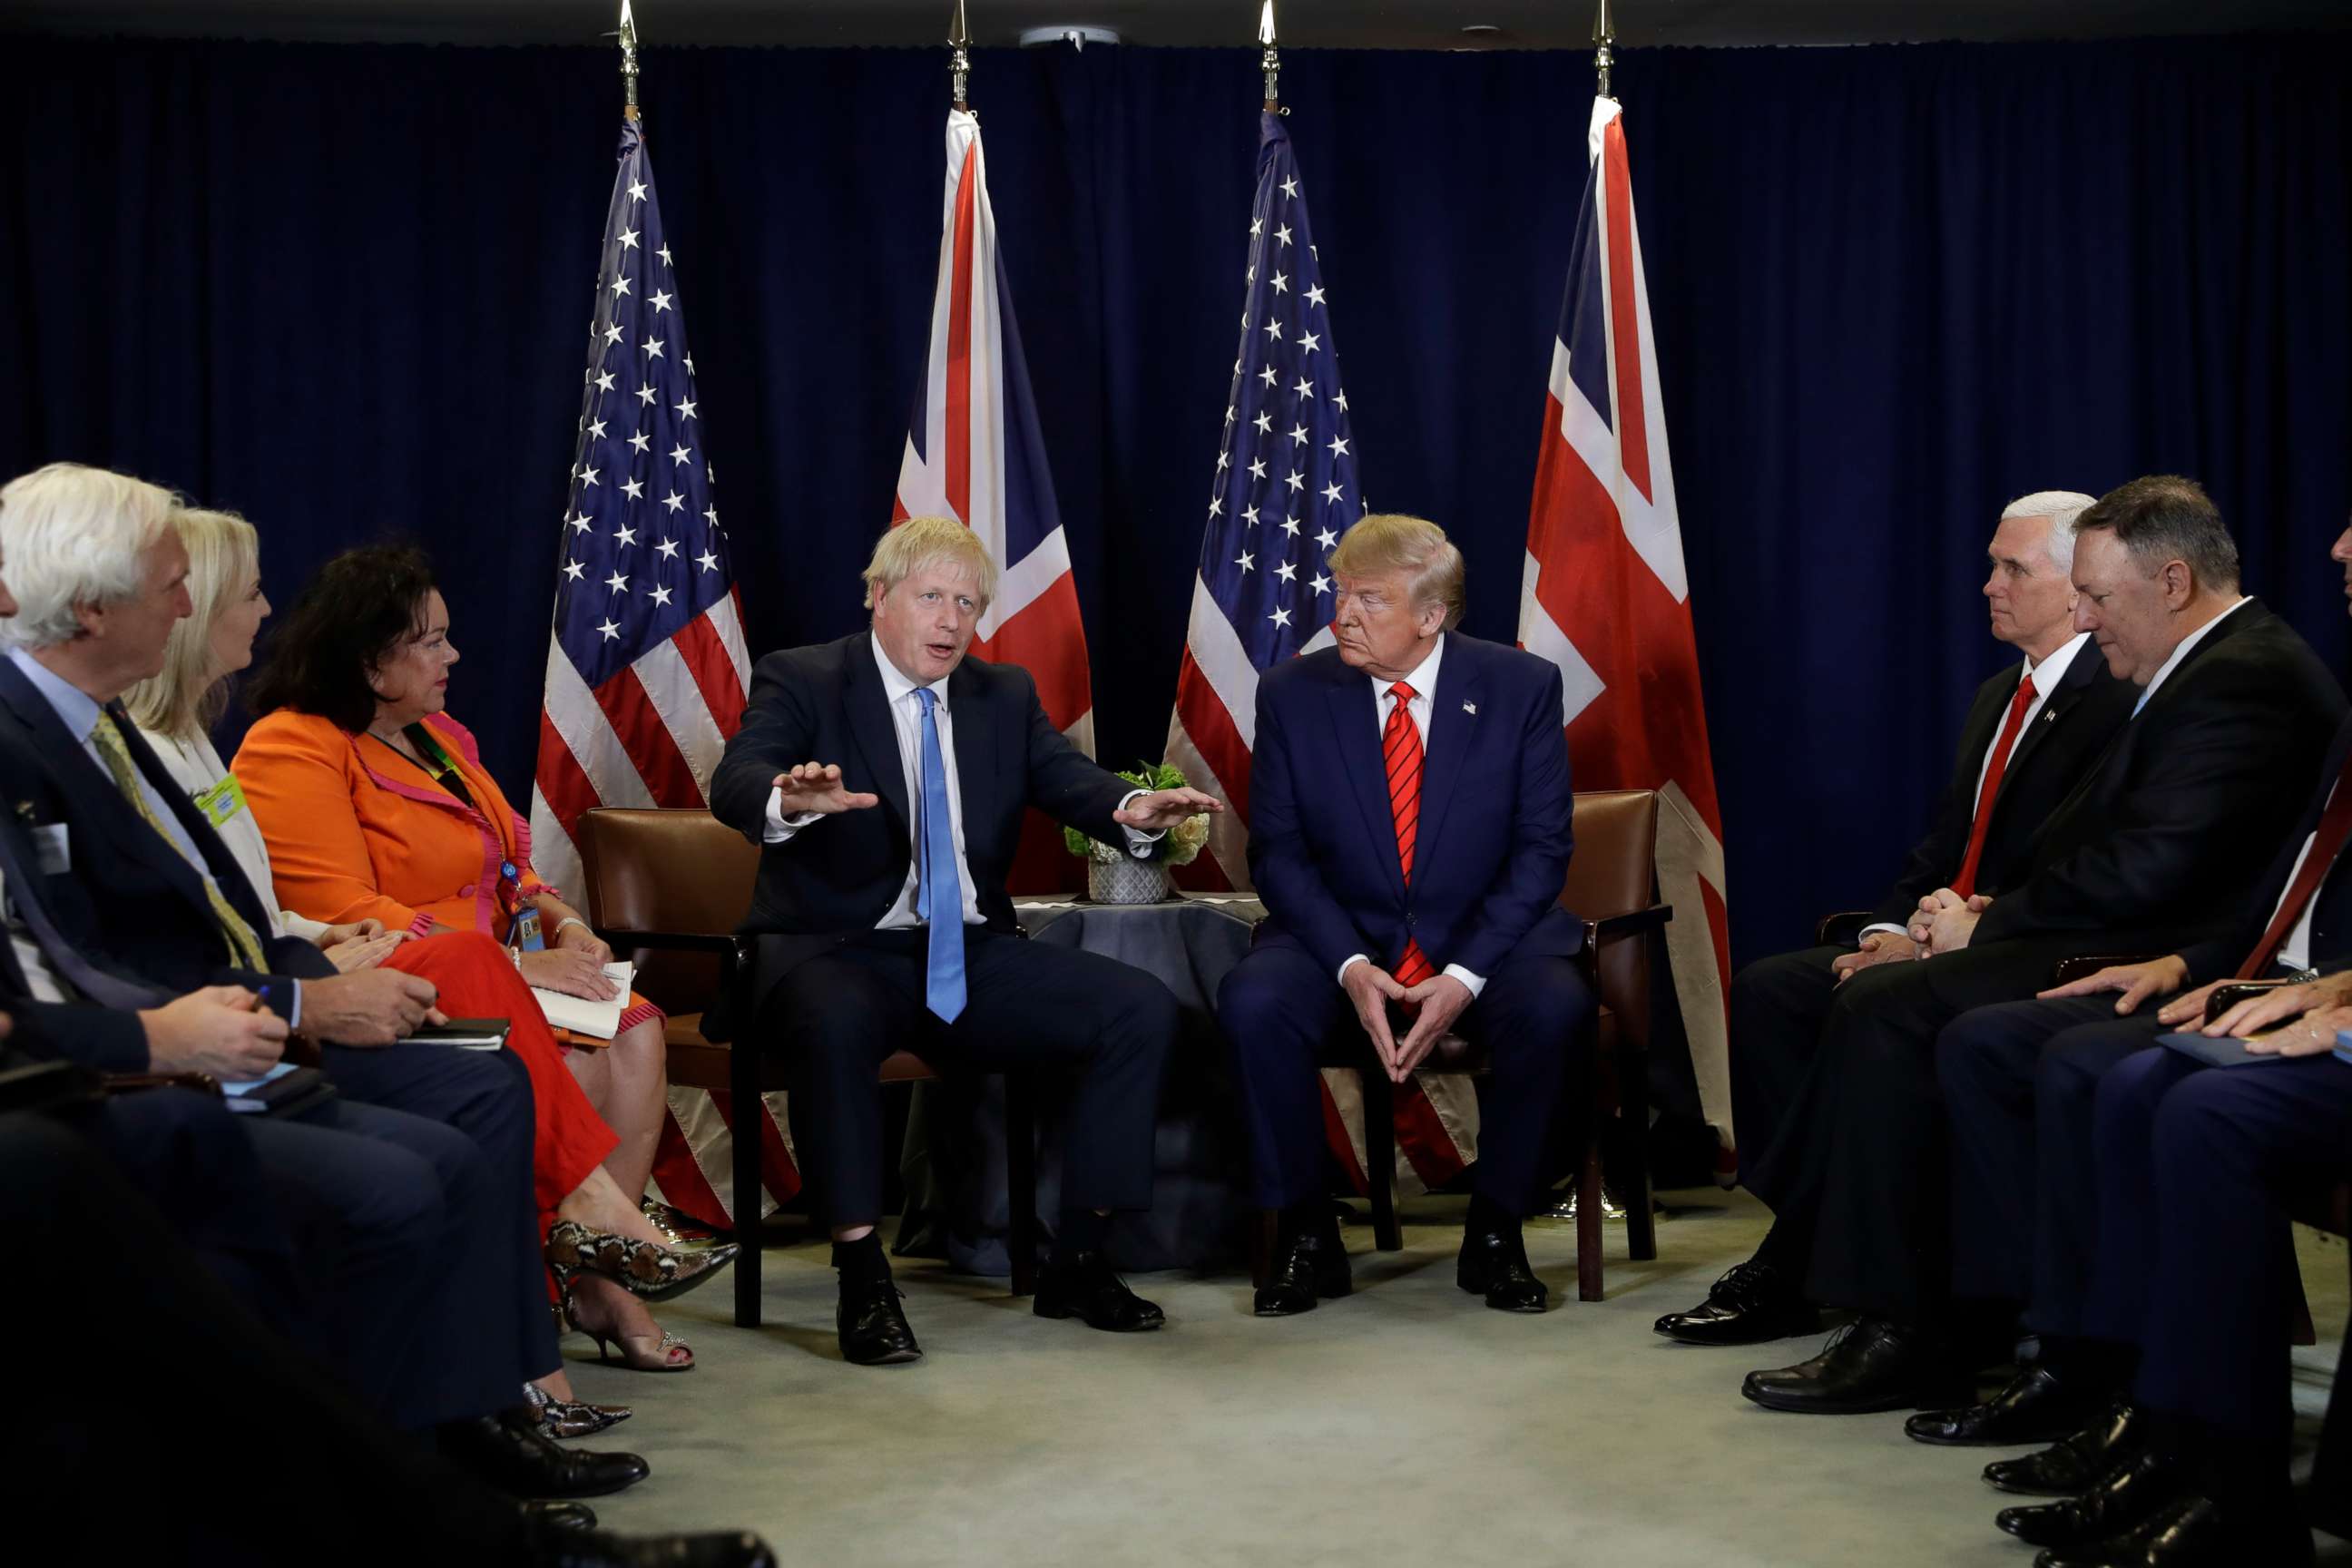 PHOTO: President Donald Trump meets with British Prime Minister Boris Johnson at the United Nations General Assembly, Tuesday, Sept. 24, 2019, in New York.